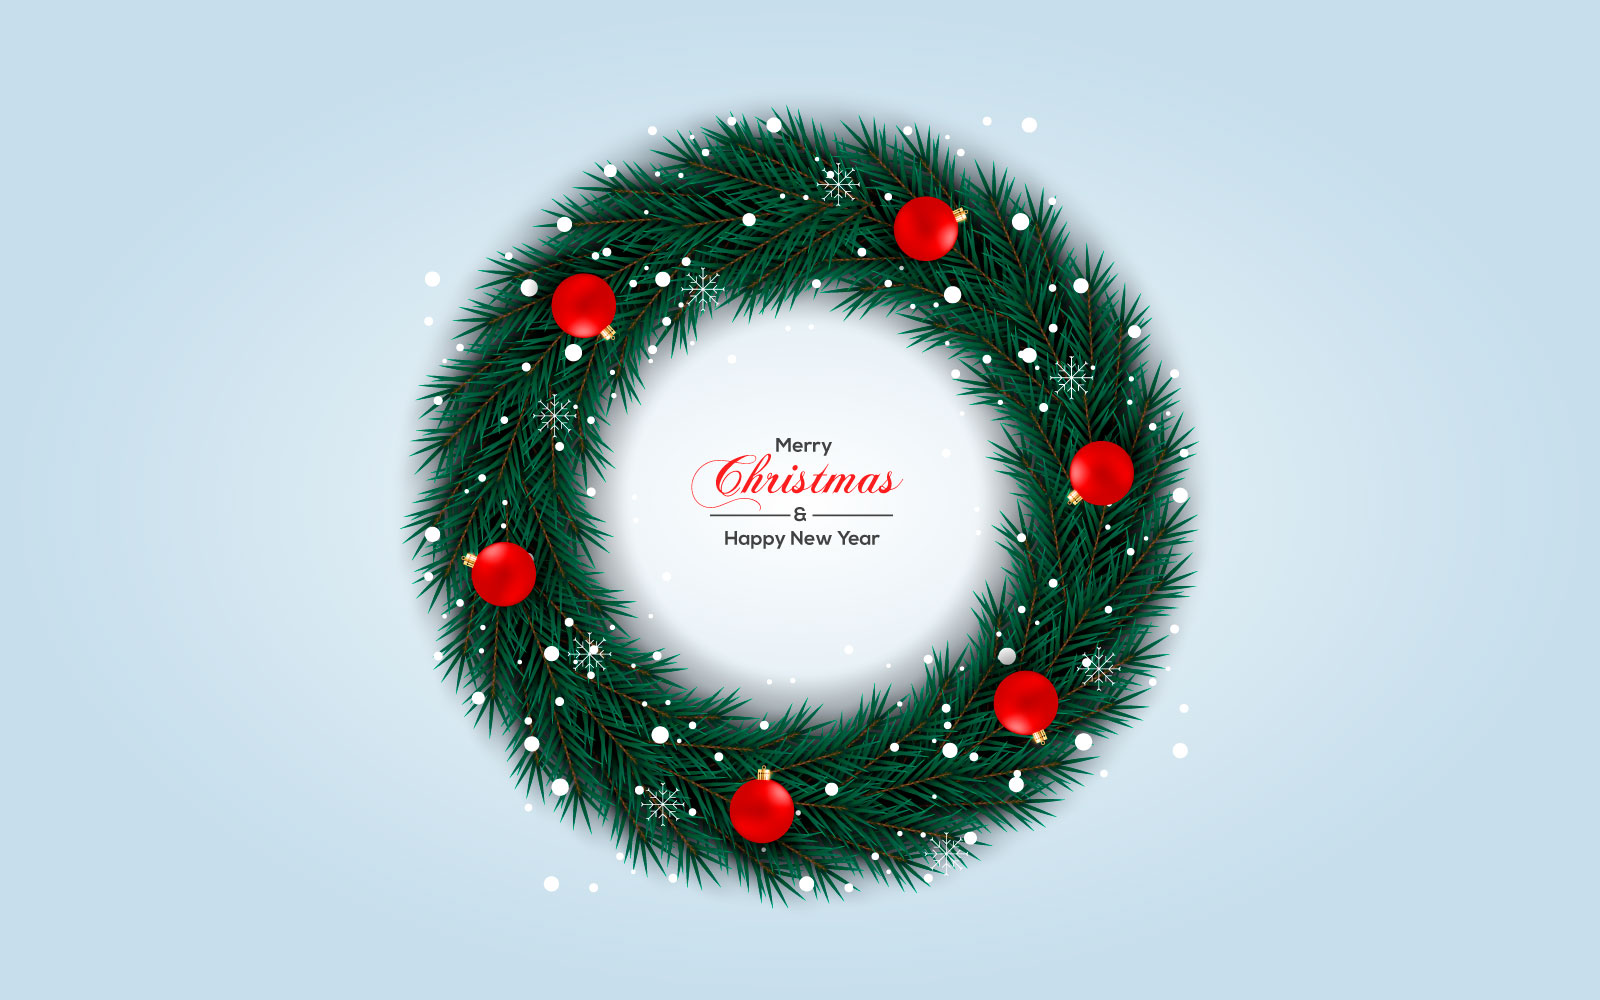 Christmas wreath vector design. merry christmas text in grass wreath element with leaves designs